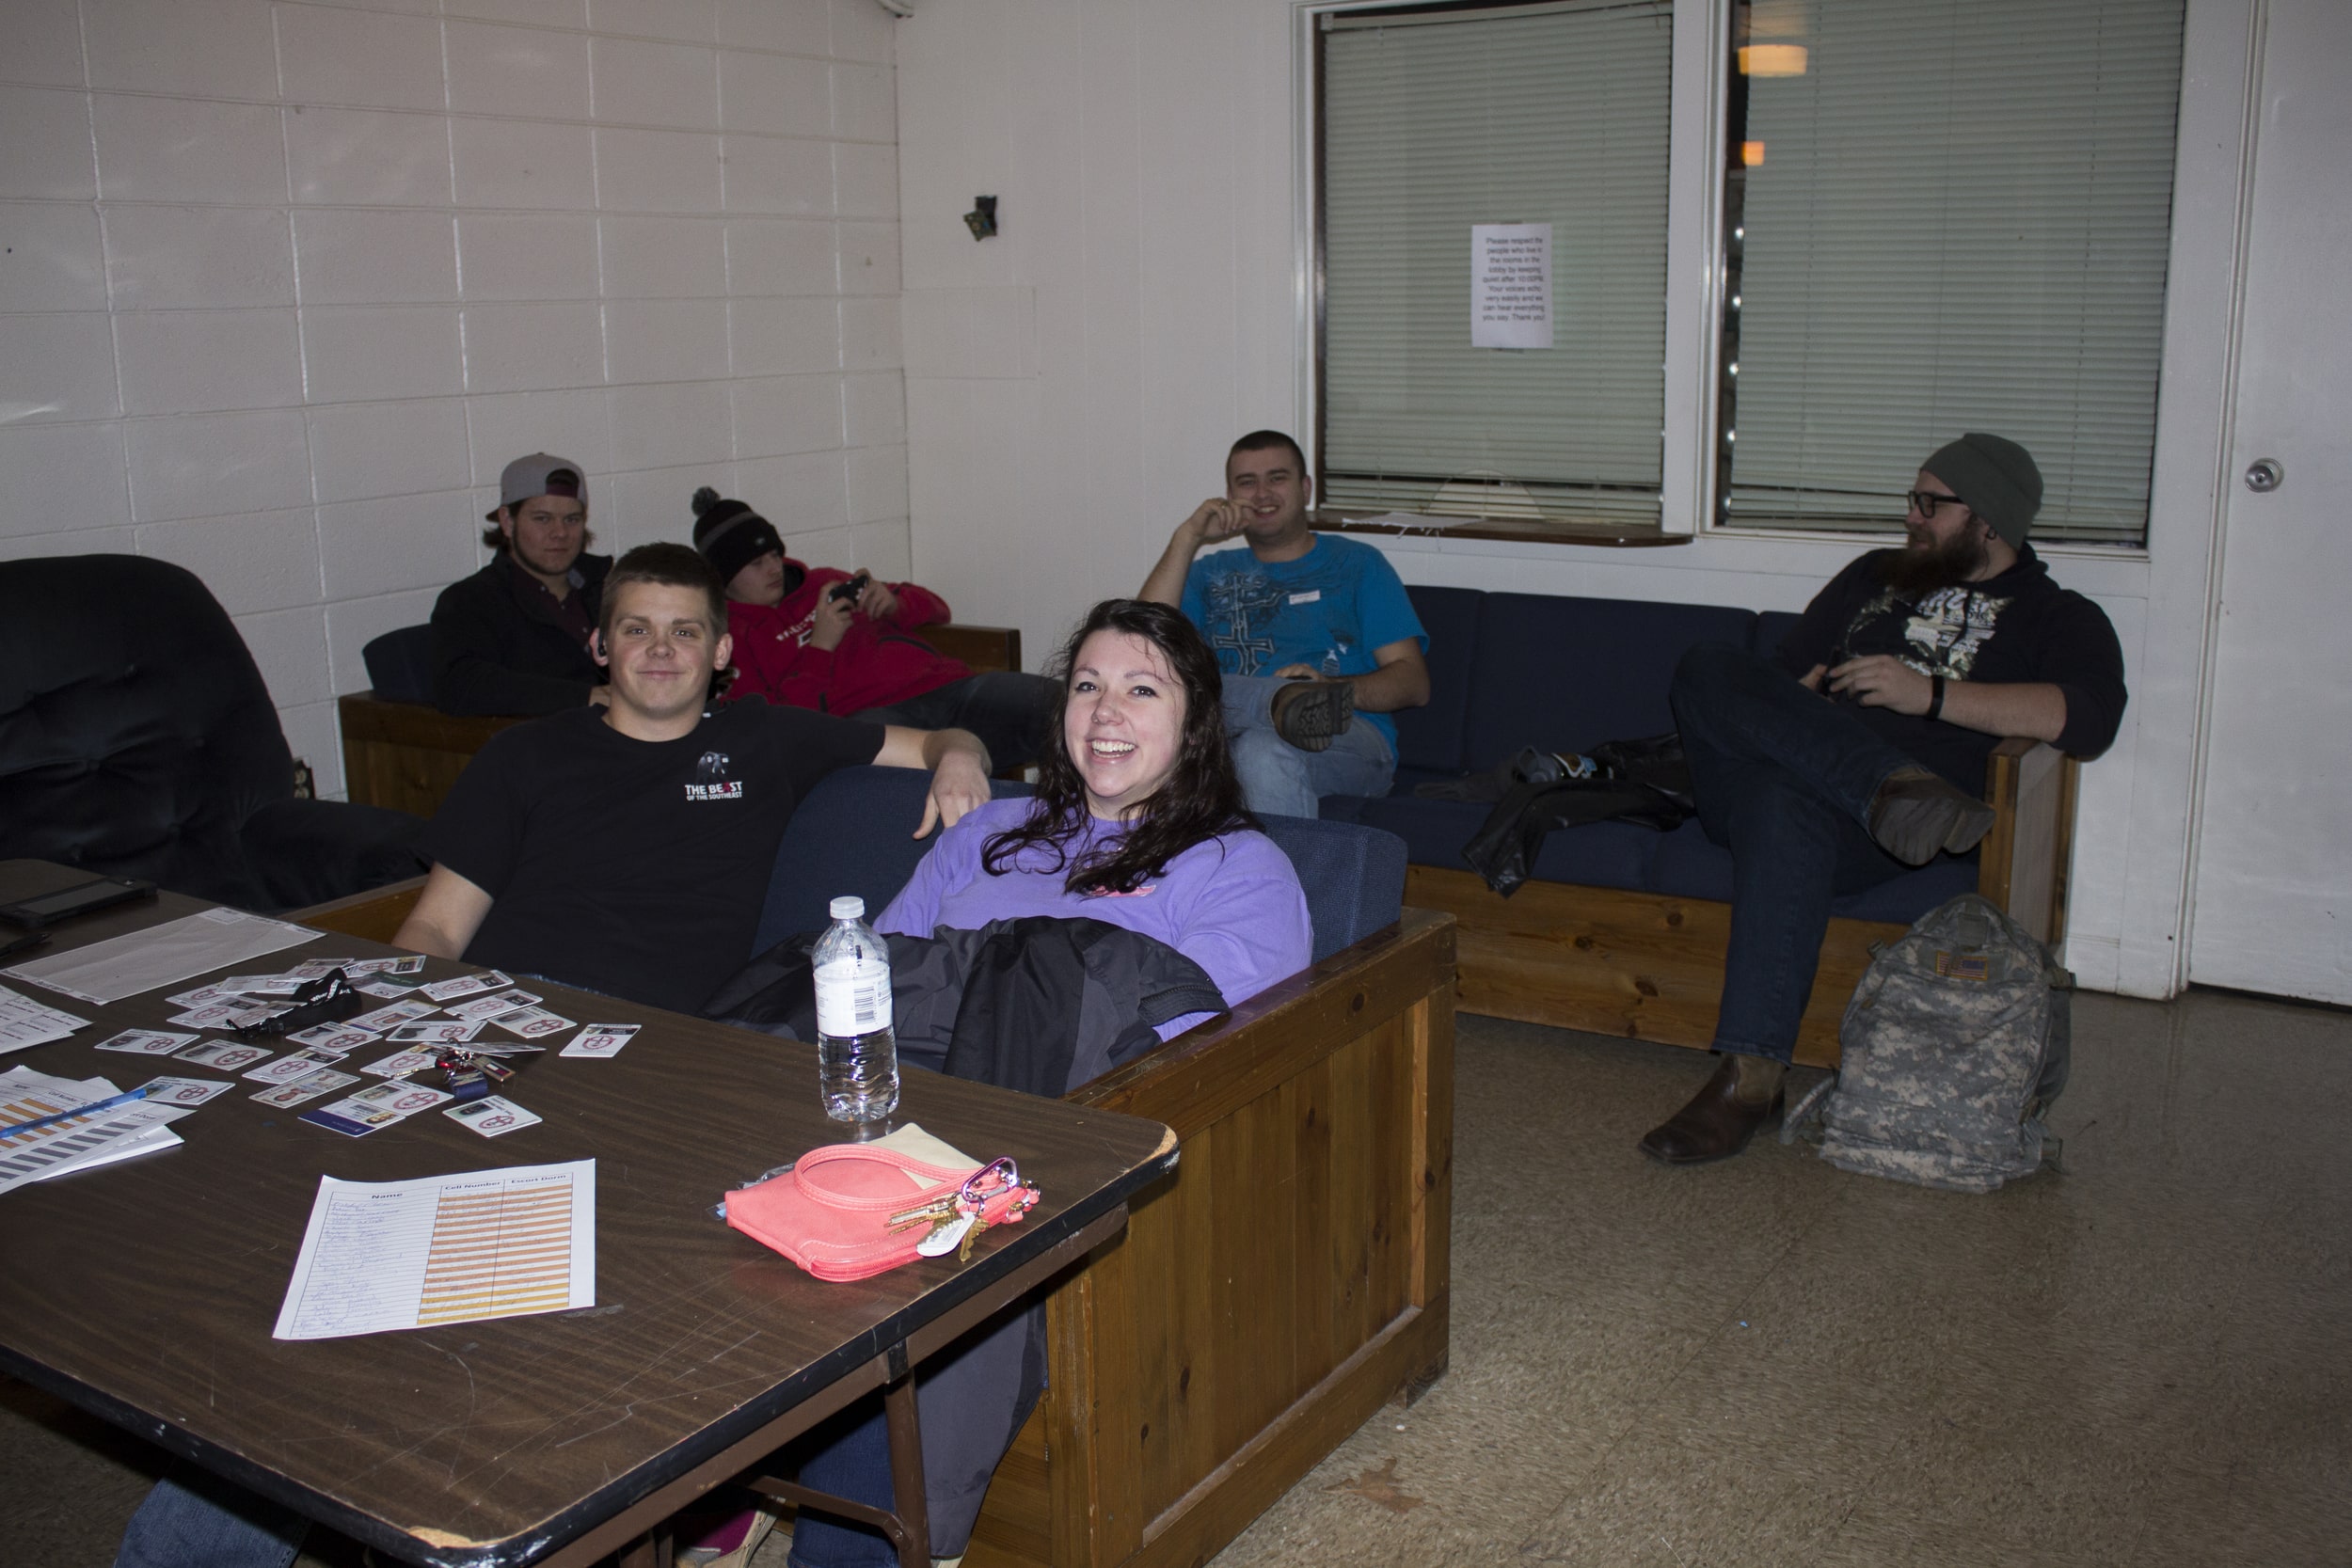  Abigail Tinker, Will Armstrong, Kyle Tatum work alongside their fellow RA's and RC's for open dorm night check-ins.&nbsp; 